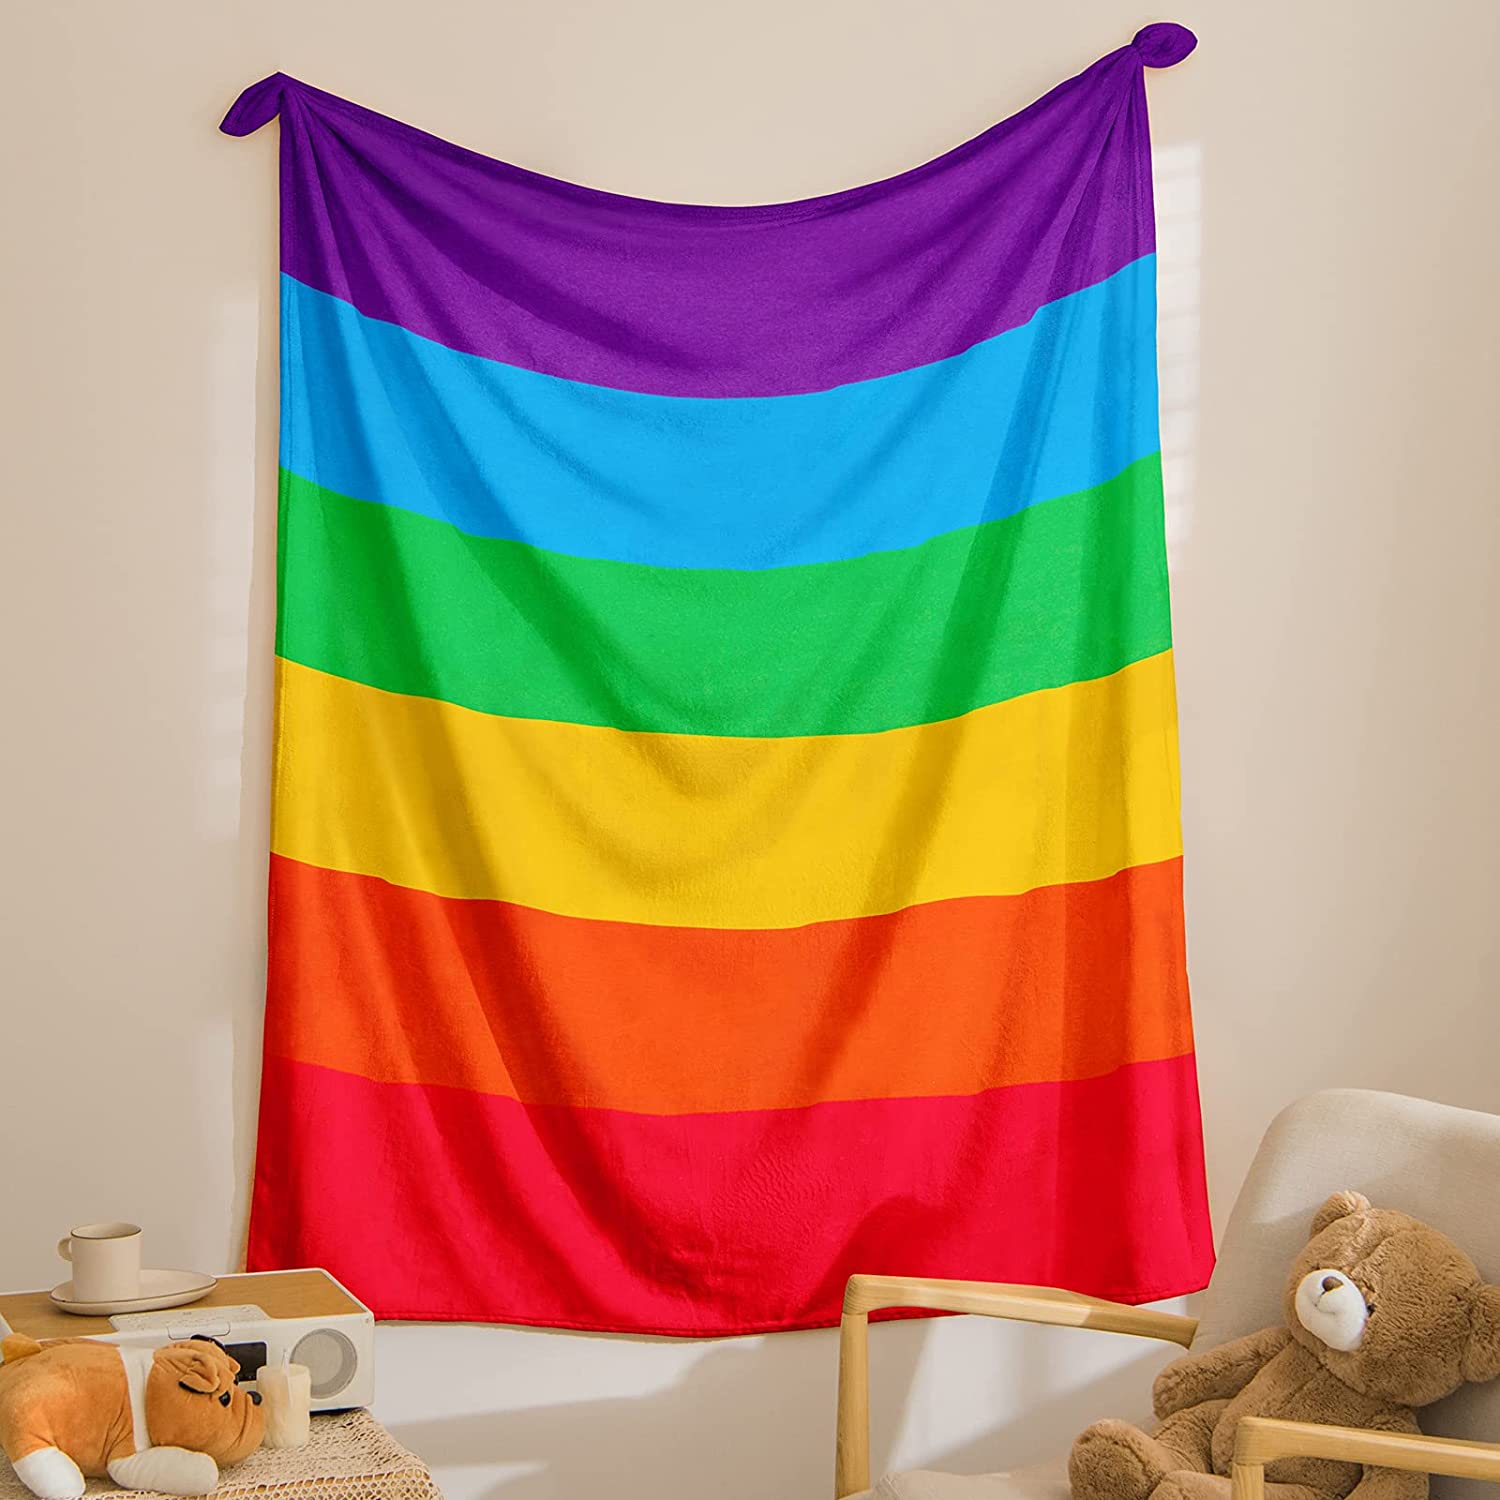 Soft Blanket Rainbow Blanket/ Throw Blanket For Couch Colorful Stripe Rainbow Printed Soft Blanket For Lgbt